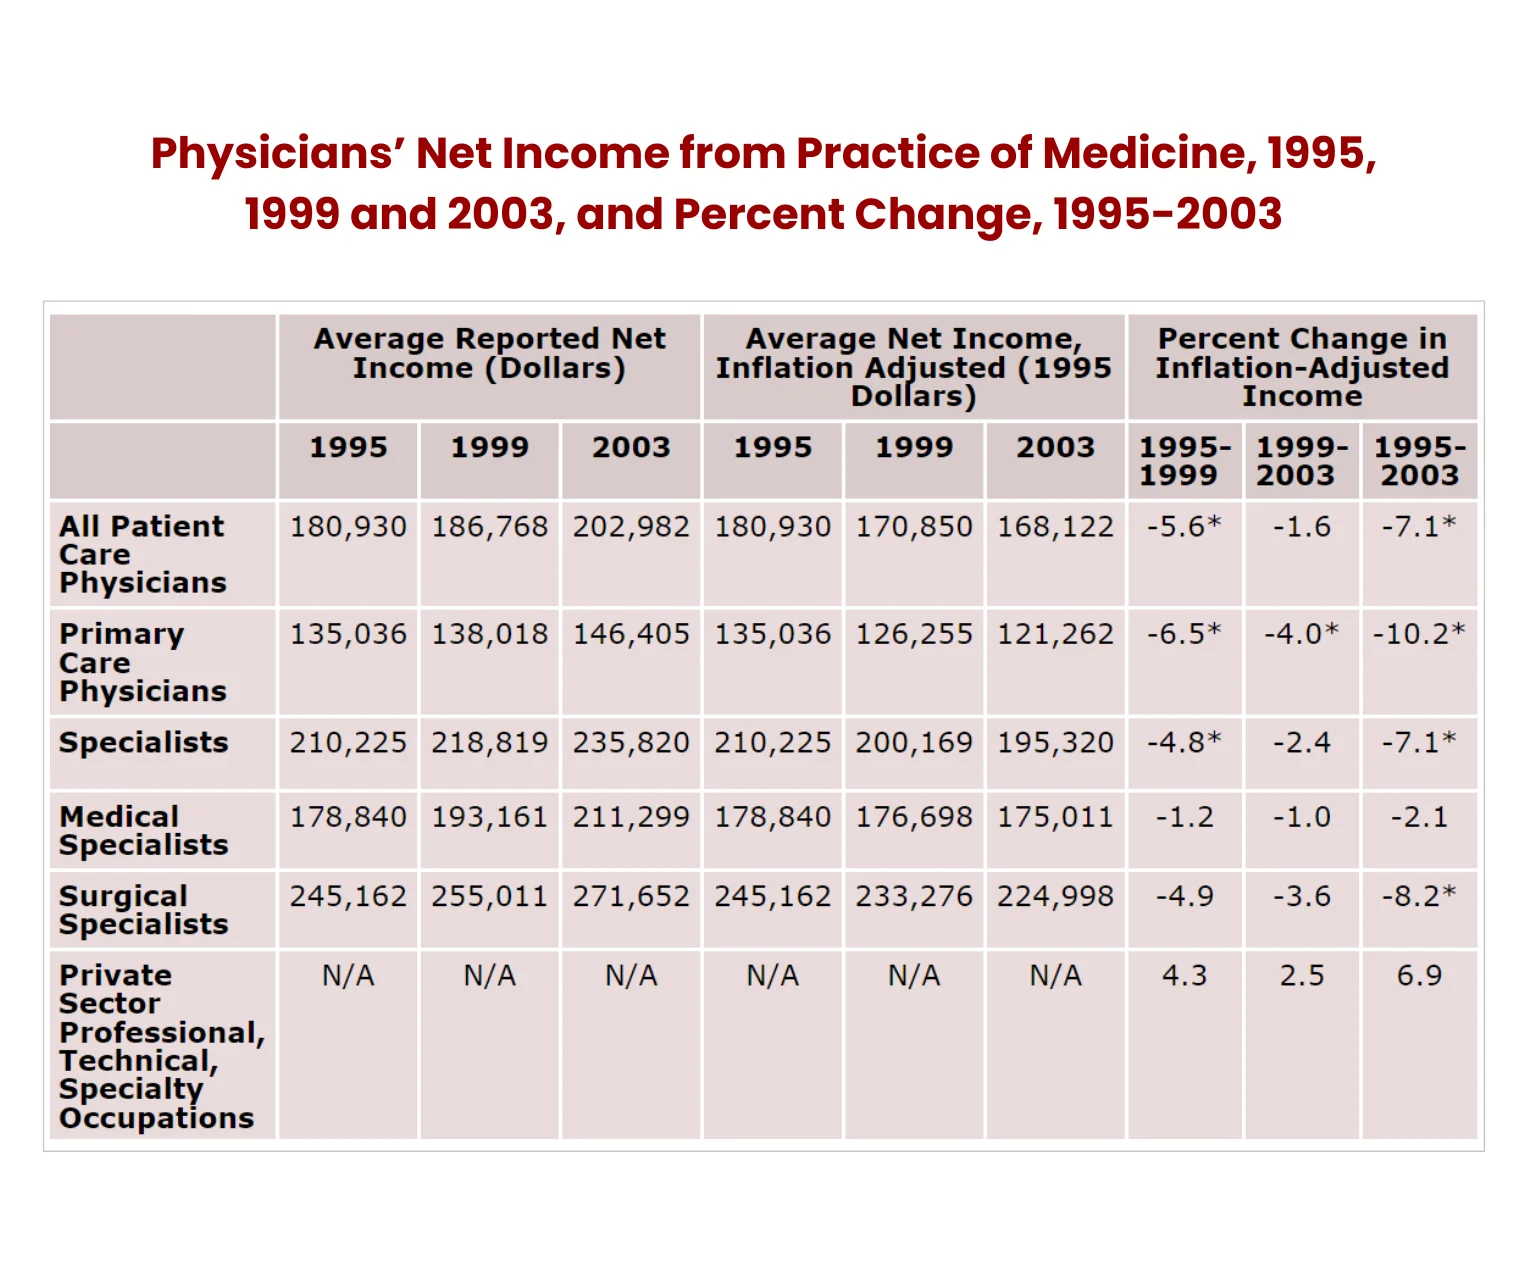 Physicians’ Net Income from Practice of Medicine, 1995, 1999 and 2003, and Percent Change, 1995-2003